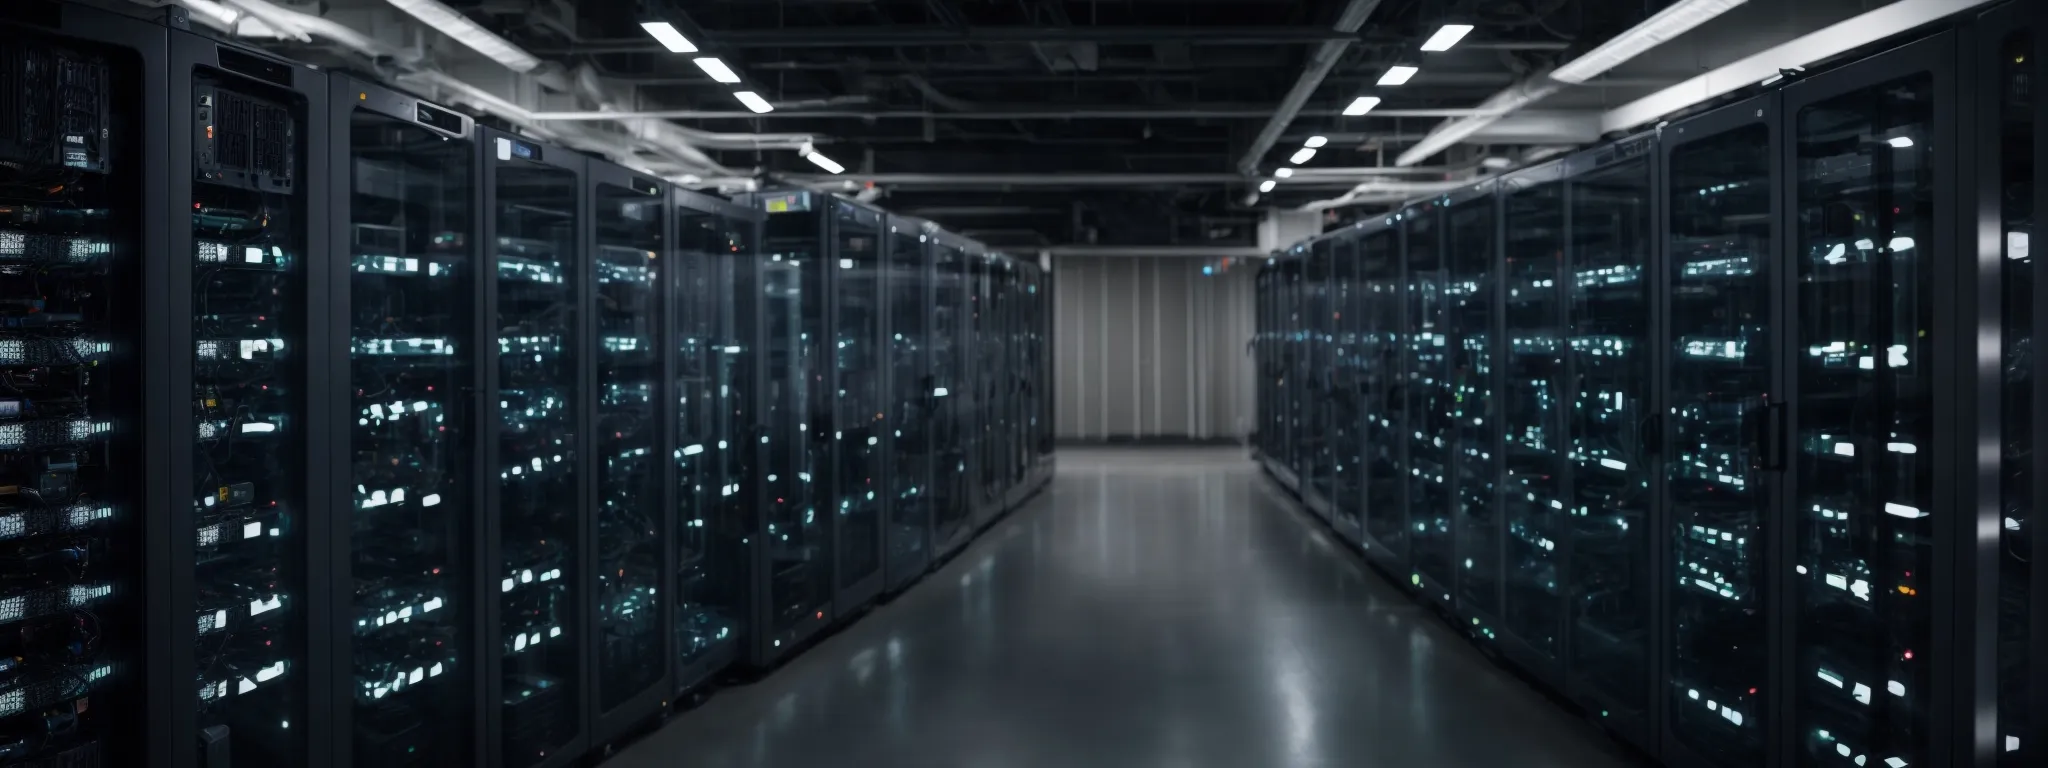 a server room lined with racks of computers indicating high-tech process automation.